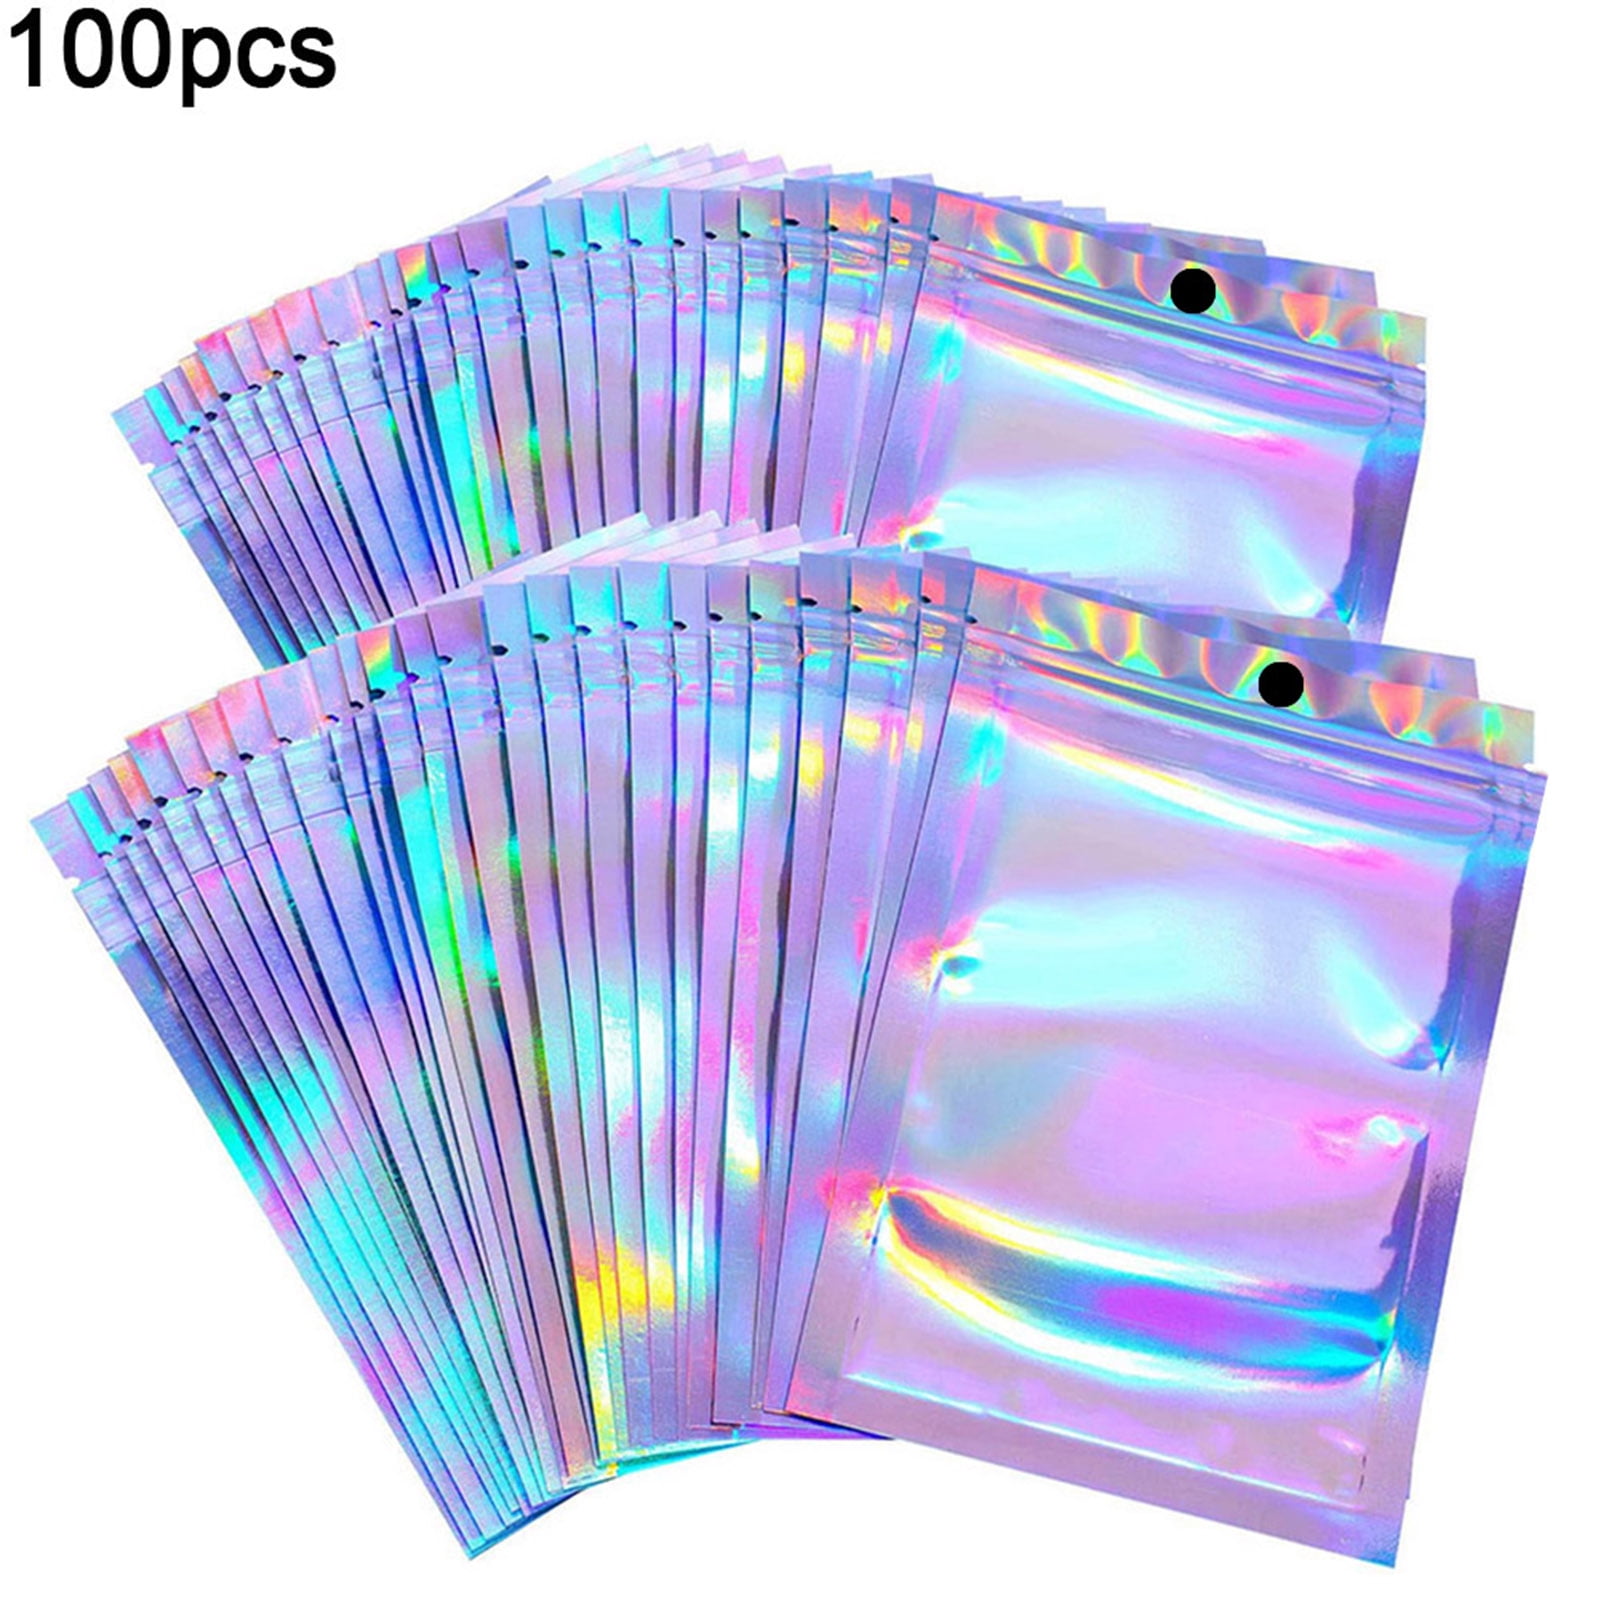 NATX 100pcs Clear PVC Transparent Zip Lock Jewelry Bag Small Size Dust Proof Airtight Pouch Plastic Zipper Self Seal Packing, Gold